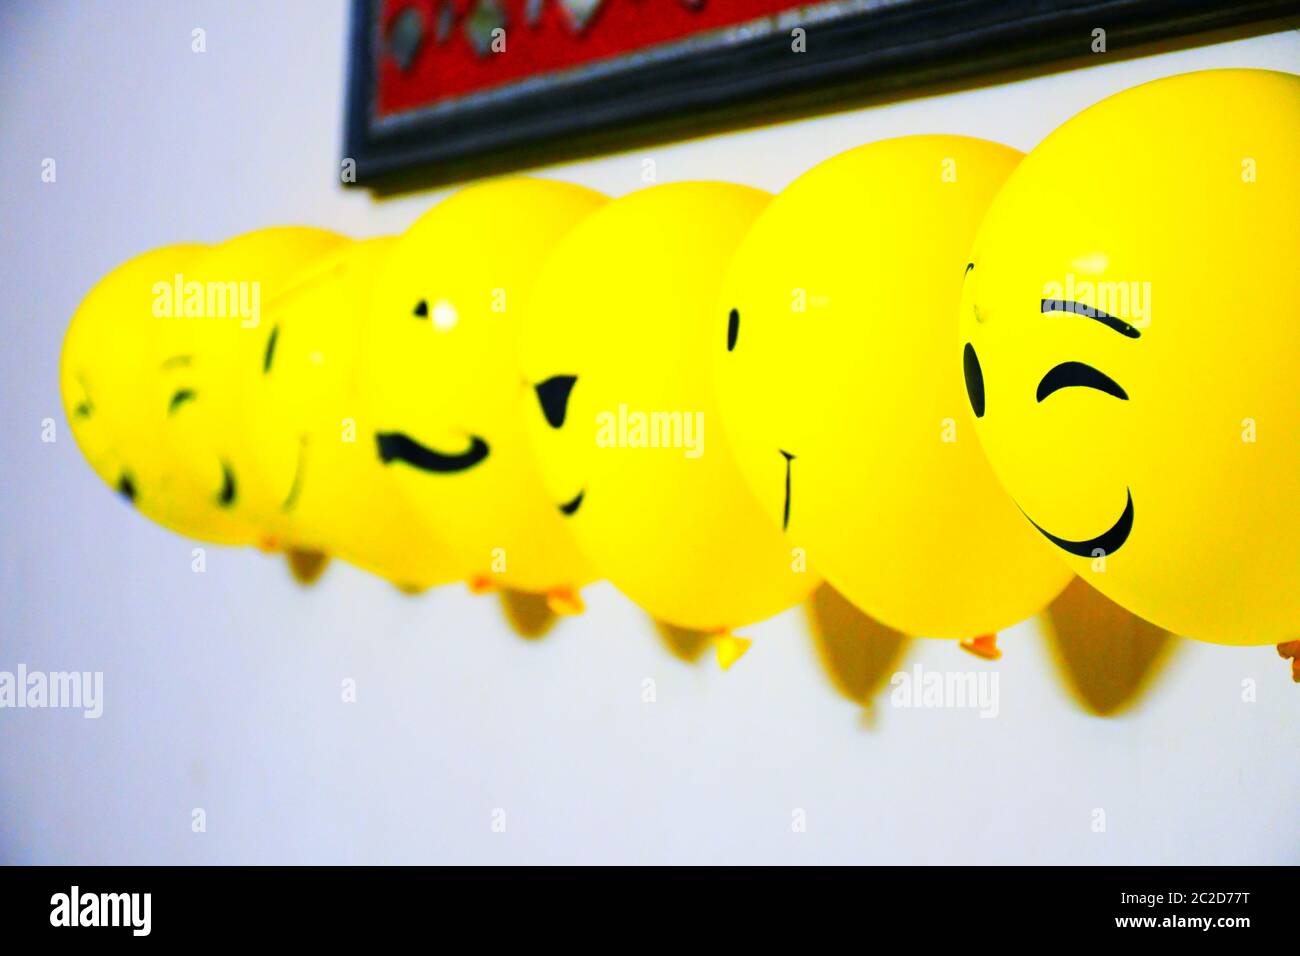 Balloons decoration on wall, emoji faces on balloons Stock Photo